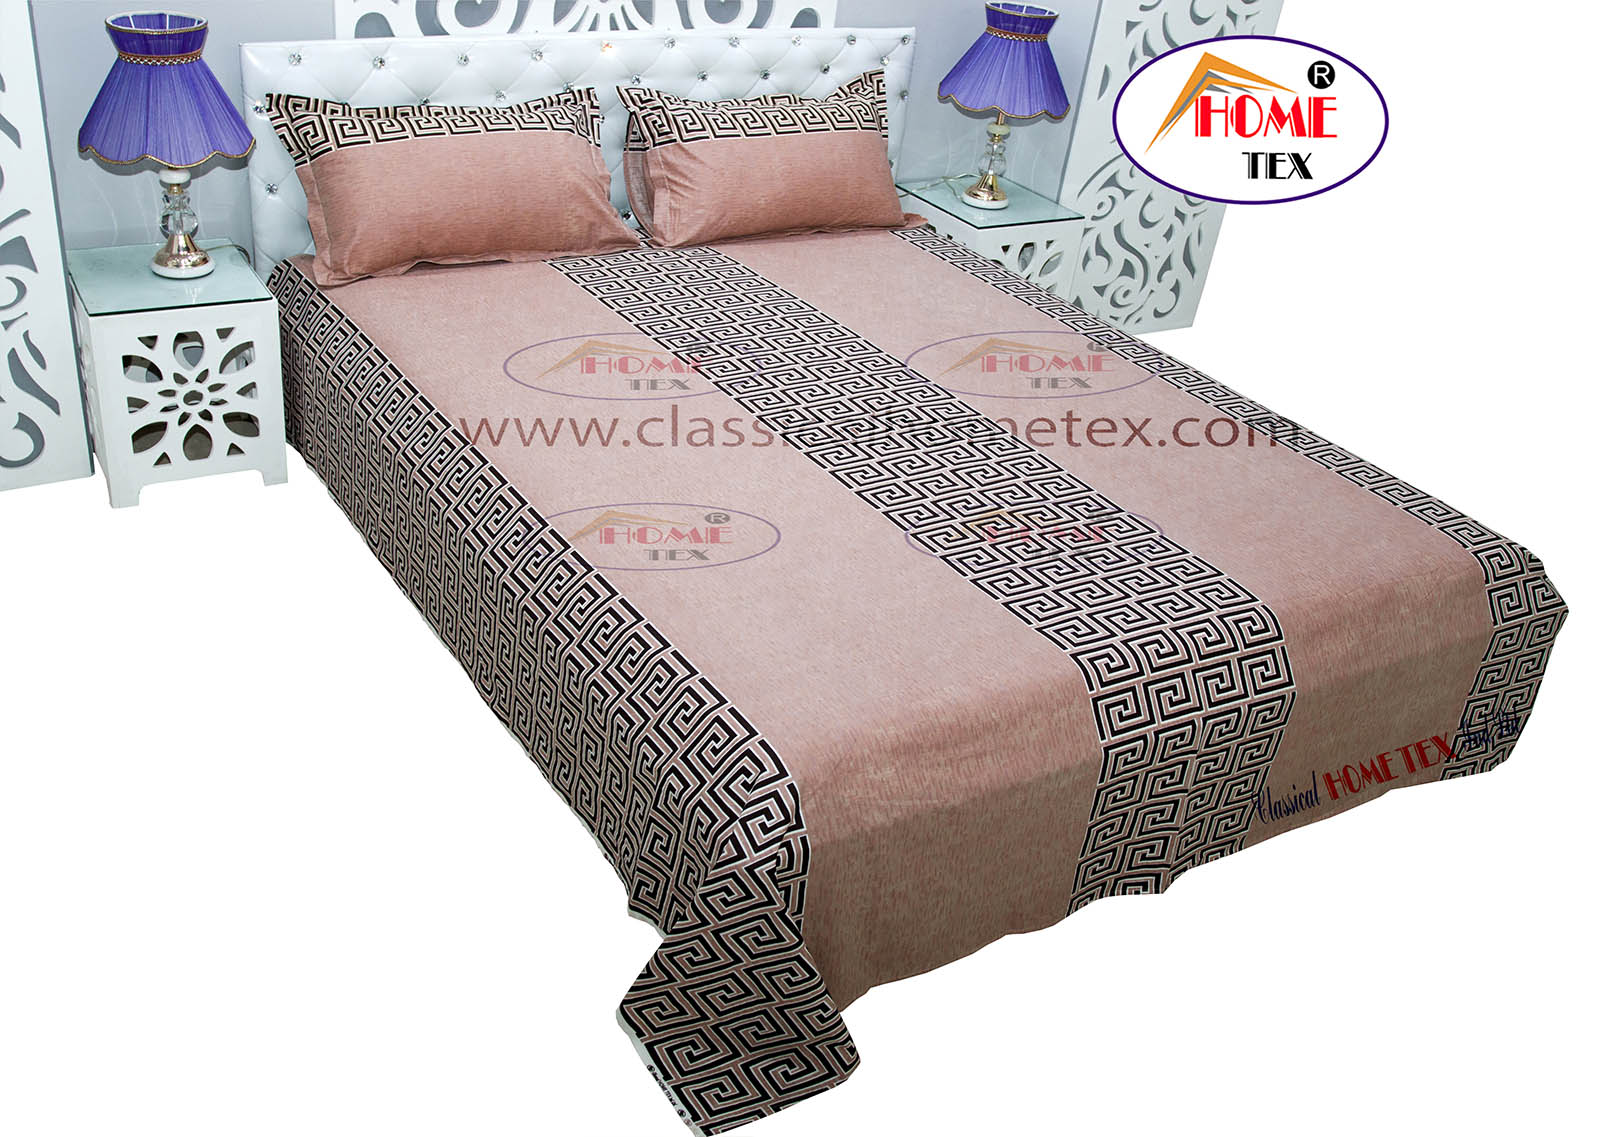 Buy Home Tex Bed Sheets Bed Covers At A Cheap Price In Bangladesh From Classical Home Tex Ind Ltd